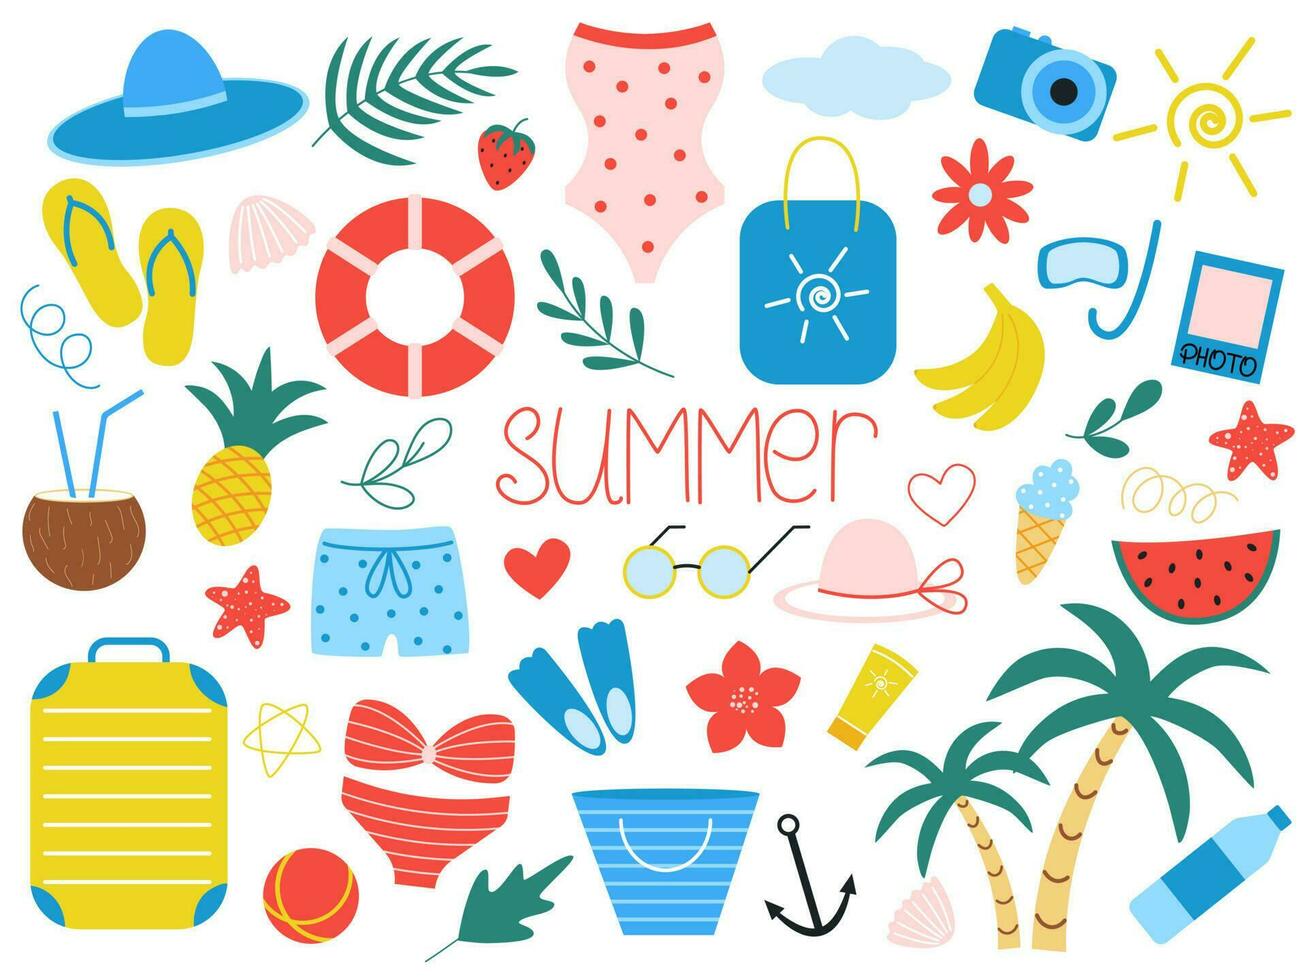 Summer vacation set of elements vector